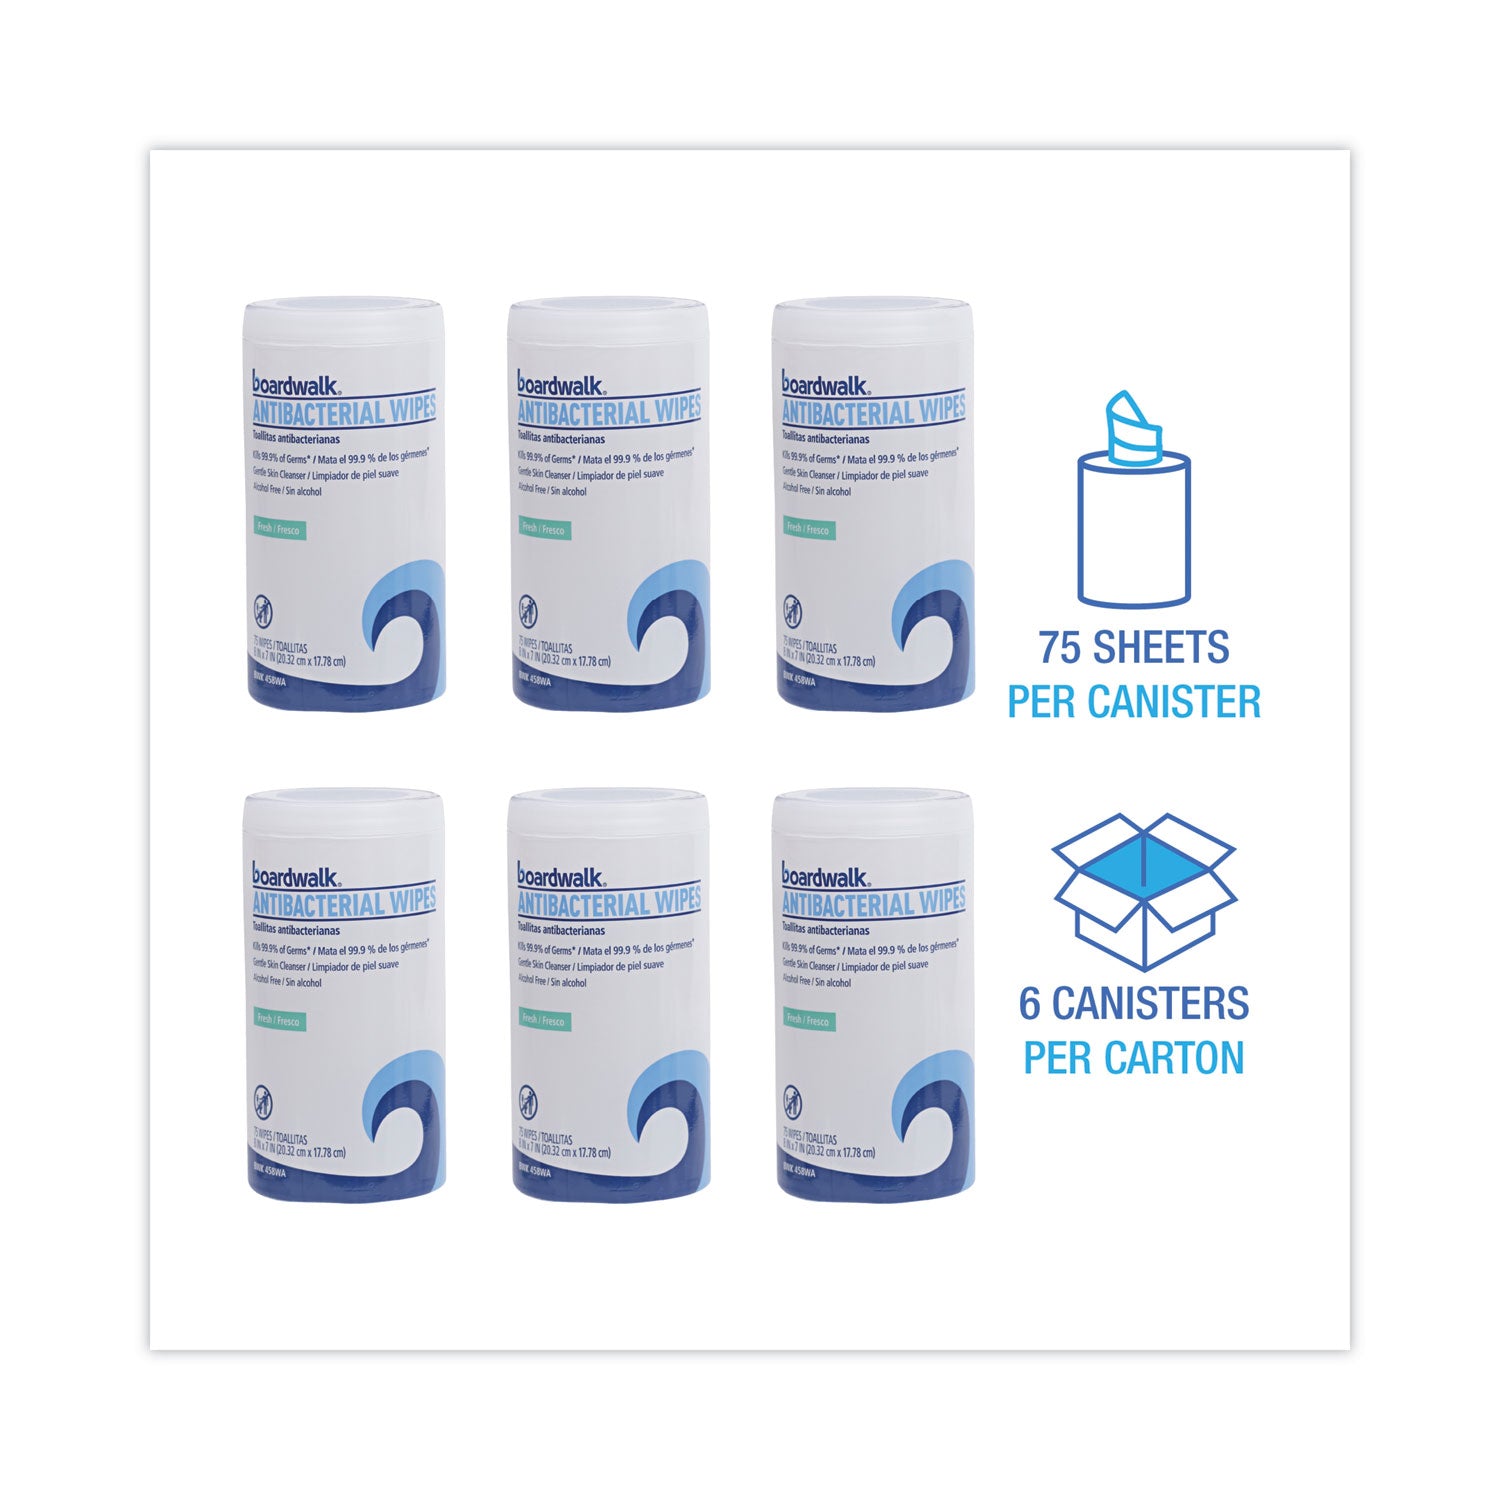 antibacterial-wipes-54-x-8-fresh-scent-75-canister-6-canisters-carton_bwk458wa - 4